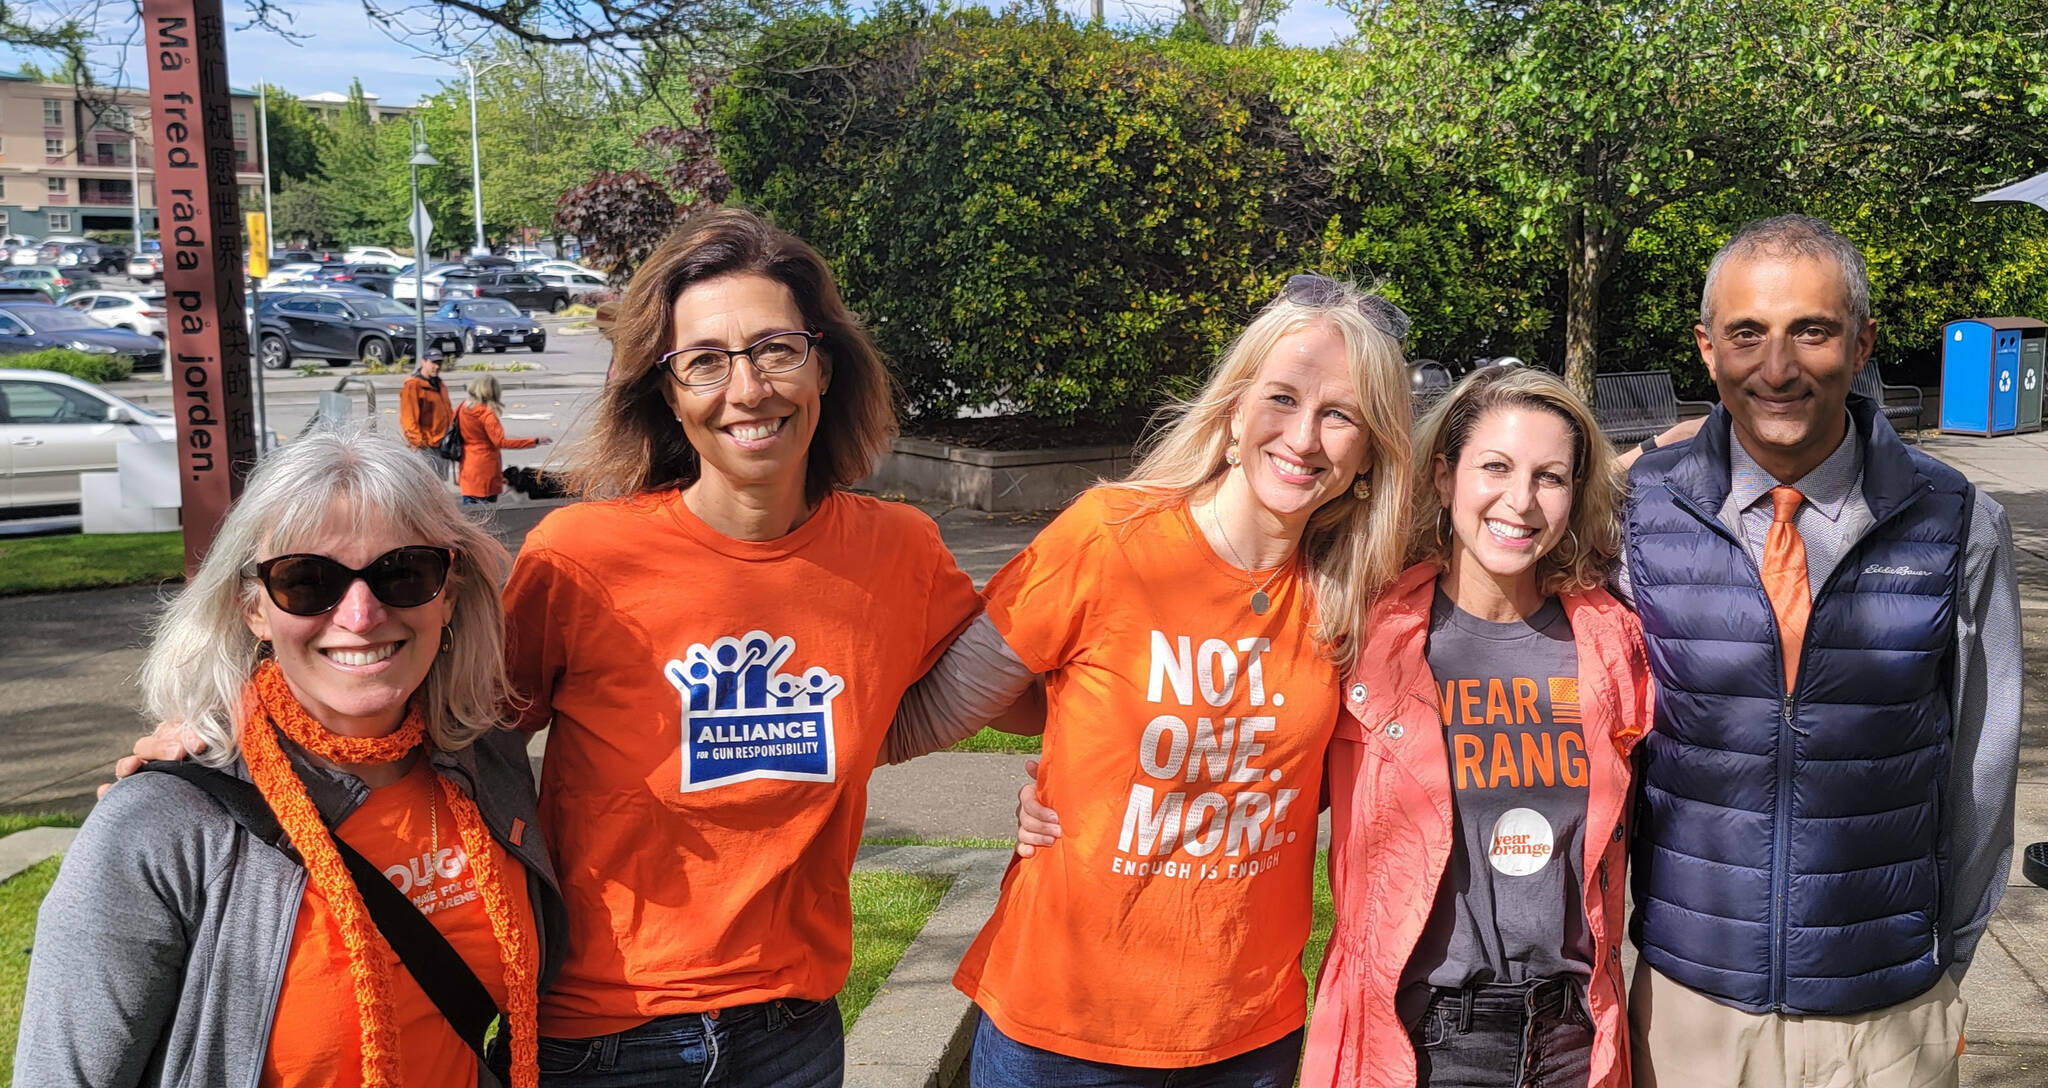 On June 3, 2022, some Mercer Island PTA Committee on Gun Violence Prevention founding members, from left to right, Gwen Loosmore, Mindy Smith, Tanya Aggar, Lori Cohen-Sanford and Bharat Shyam, gathered at a National Gun Violence Awareness Day event at Mercerdale Park. Courtesy photo